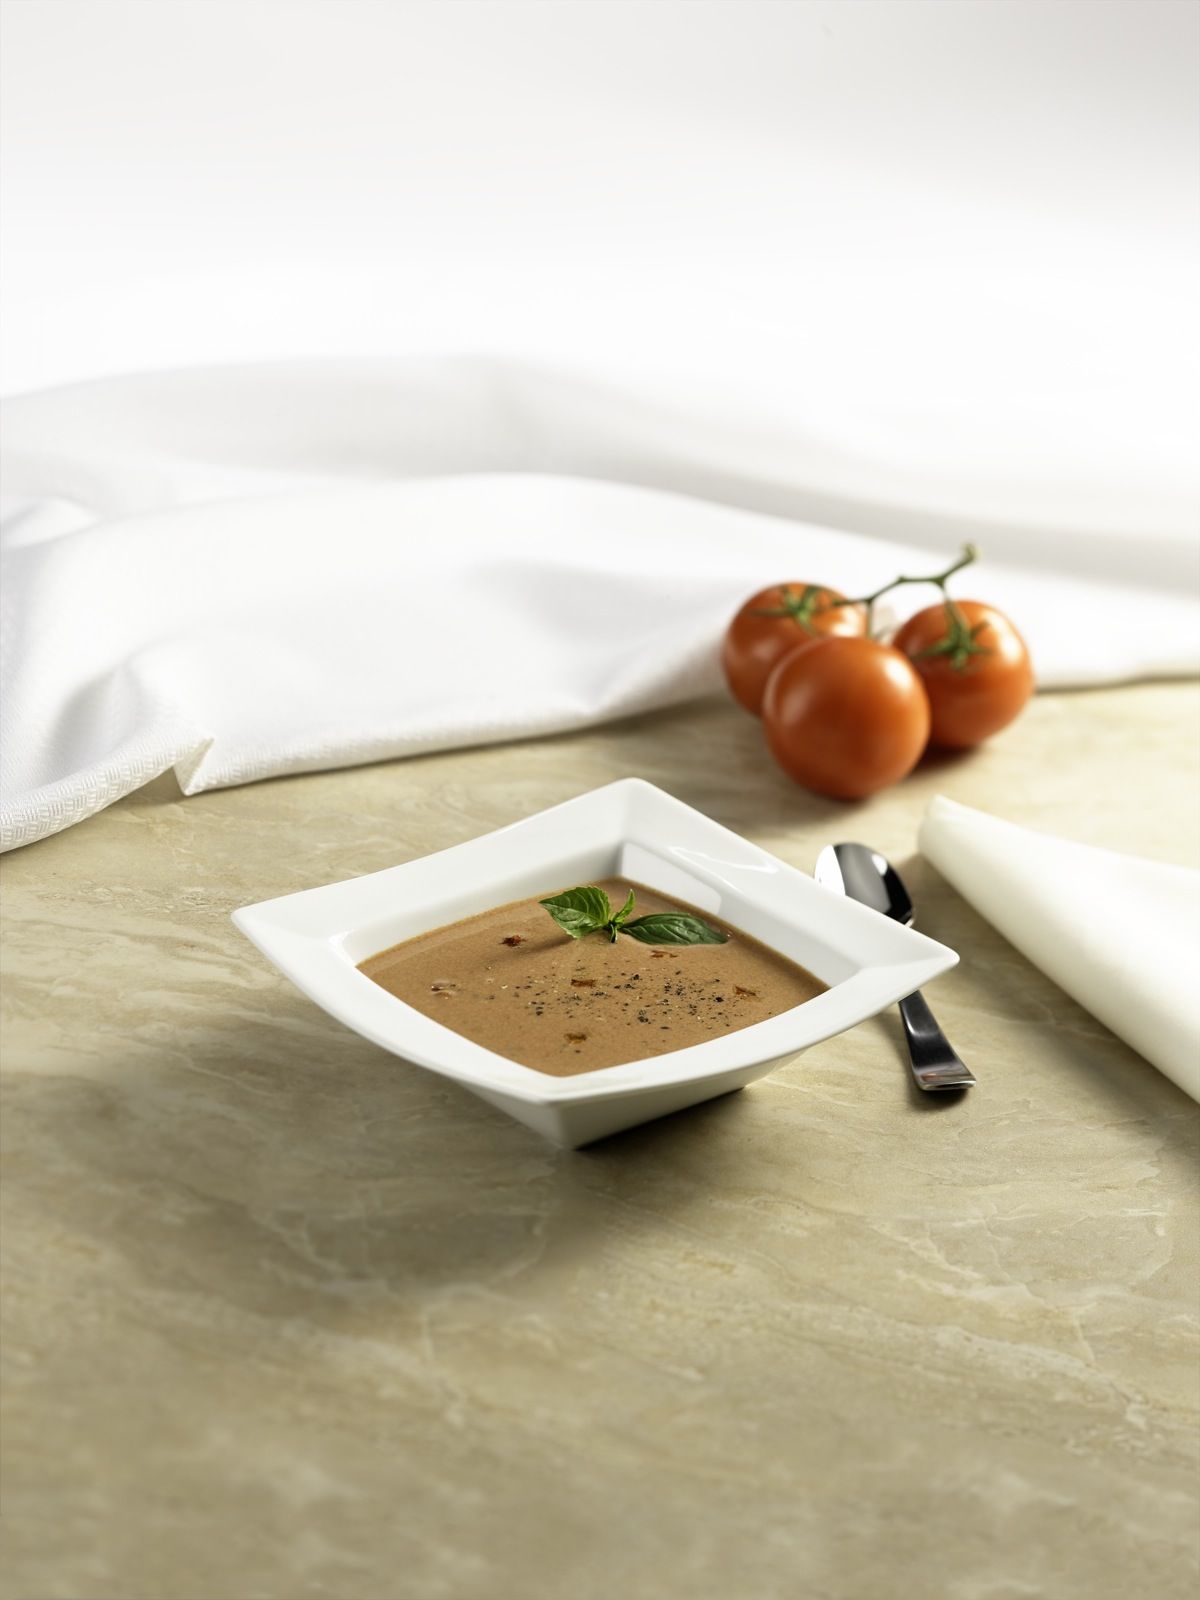 New Medifast Tomato Basil Bisque Soup Is Delicious!